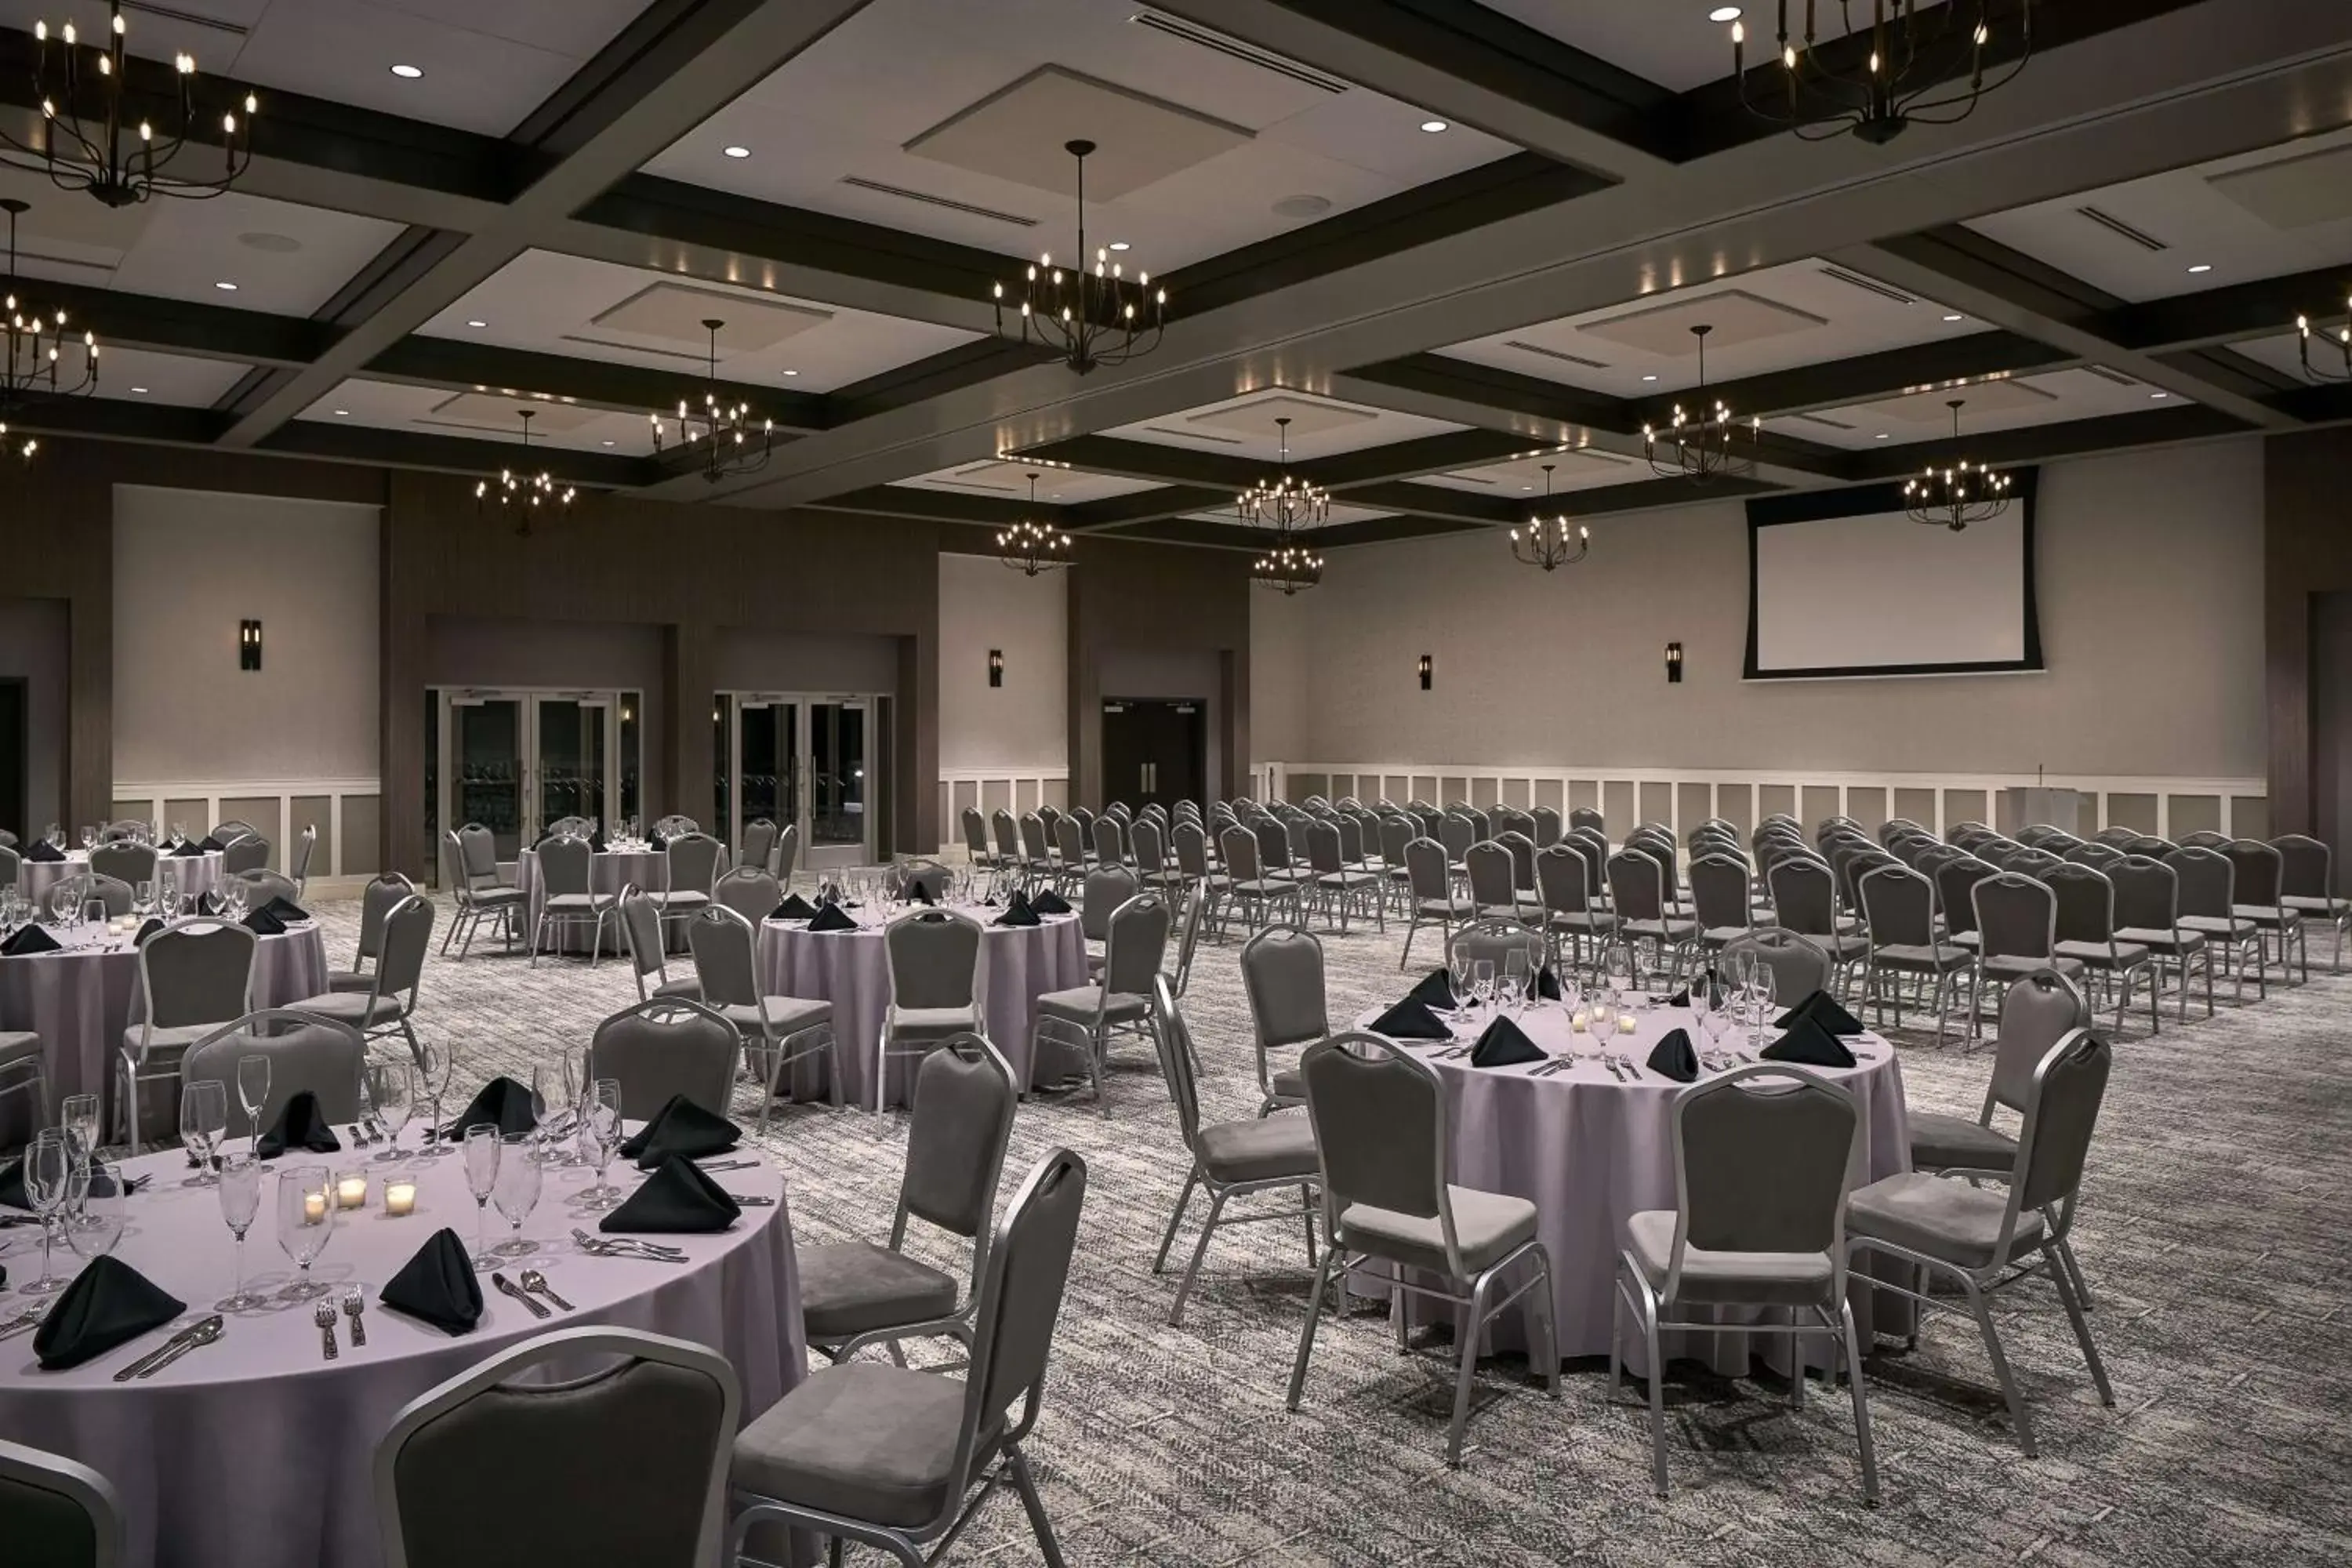 Banquet/Function facilities, Banquet Facilities in Hyatt Place Wilmington Riverfront